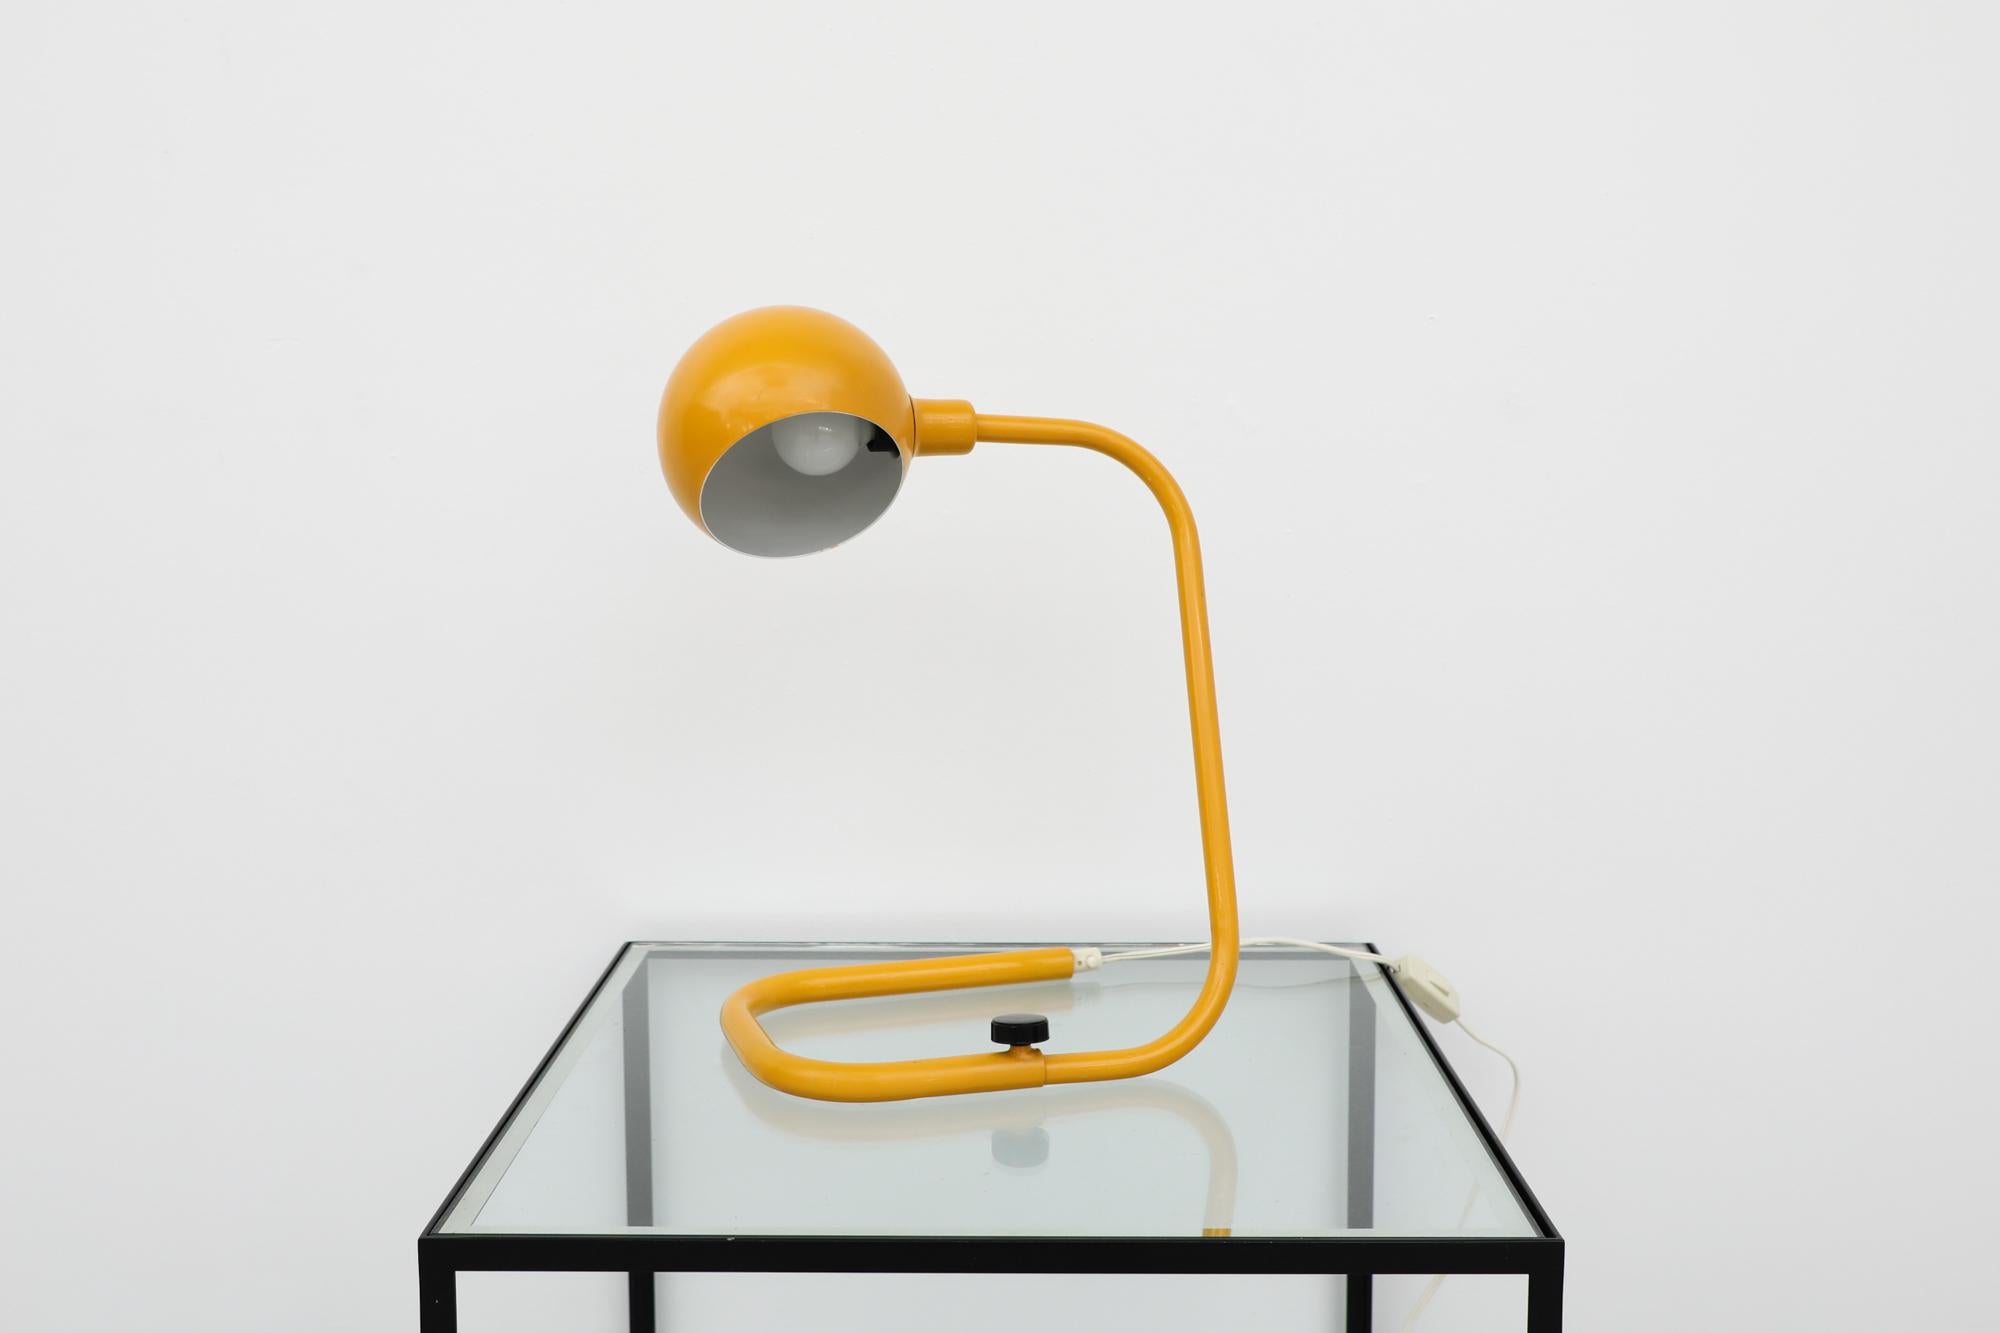 MOD Hebi style adjustable table lamp with Yellow enameled aluminum stem and diffuser. In original condition with white cord and switch.